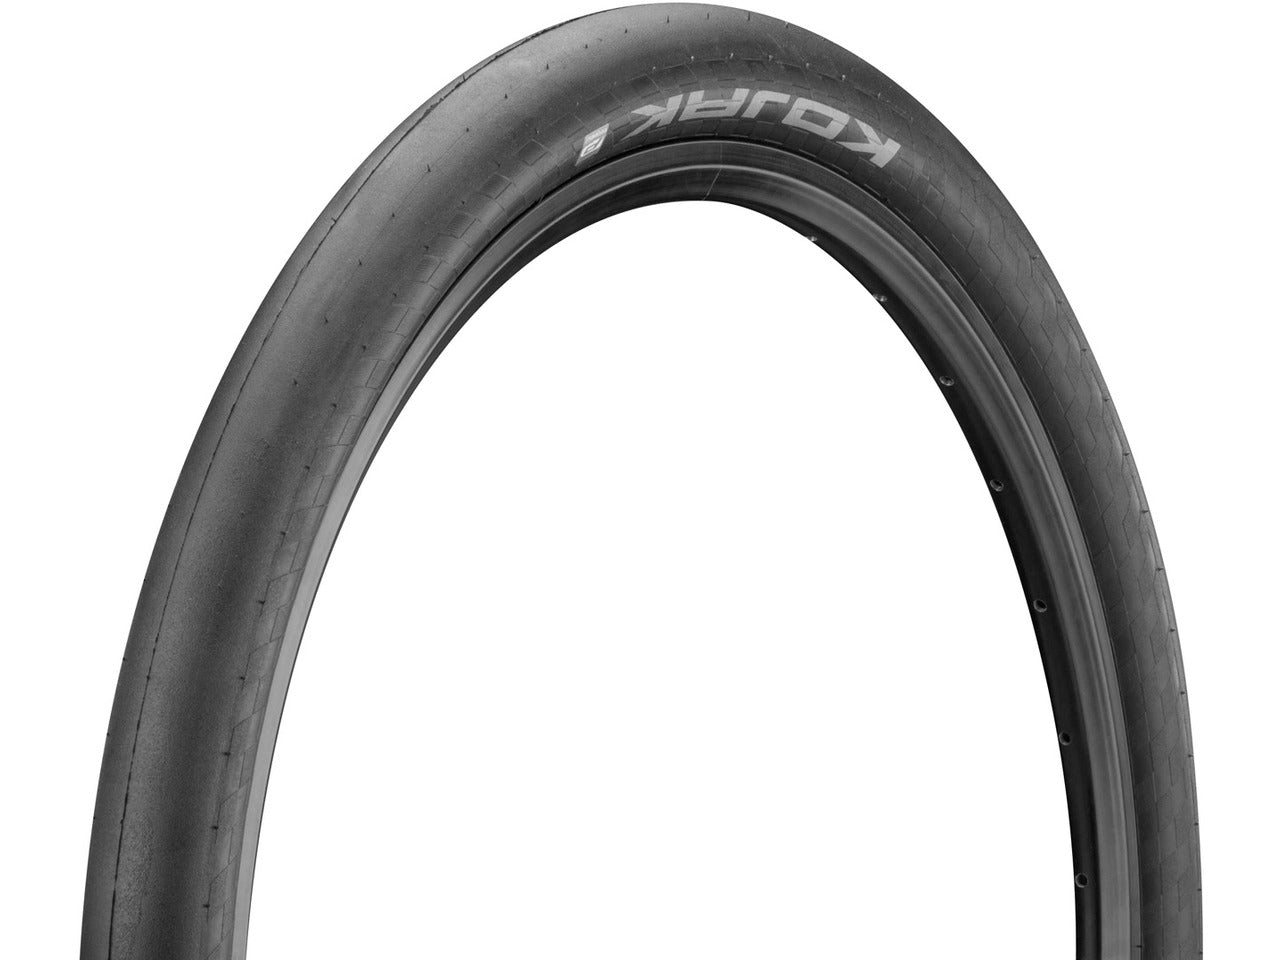 Schwalbe Kojak Tan/ Black Outer Tyre 16" 349 1/4 (Brompton/ Trifold/ Pikes/ 3Sixty/ Avro)